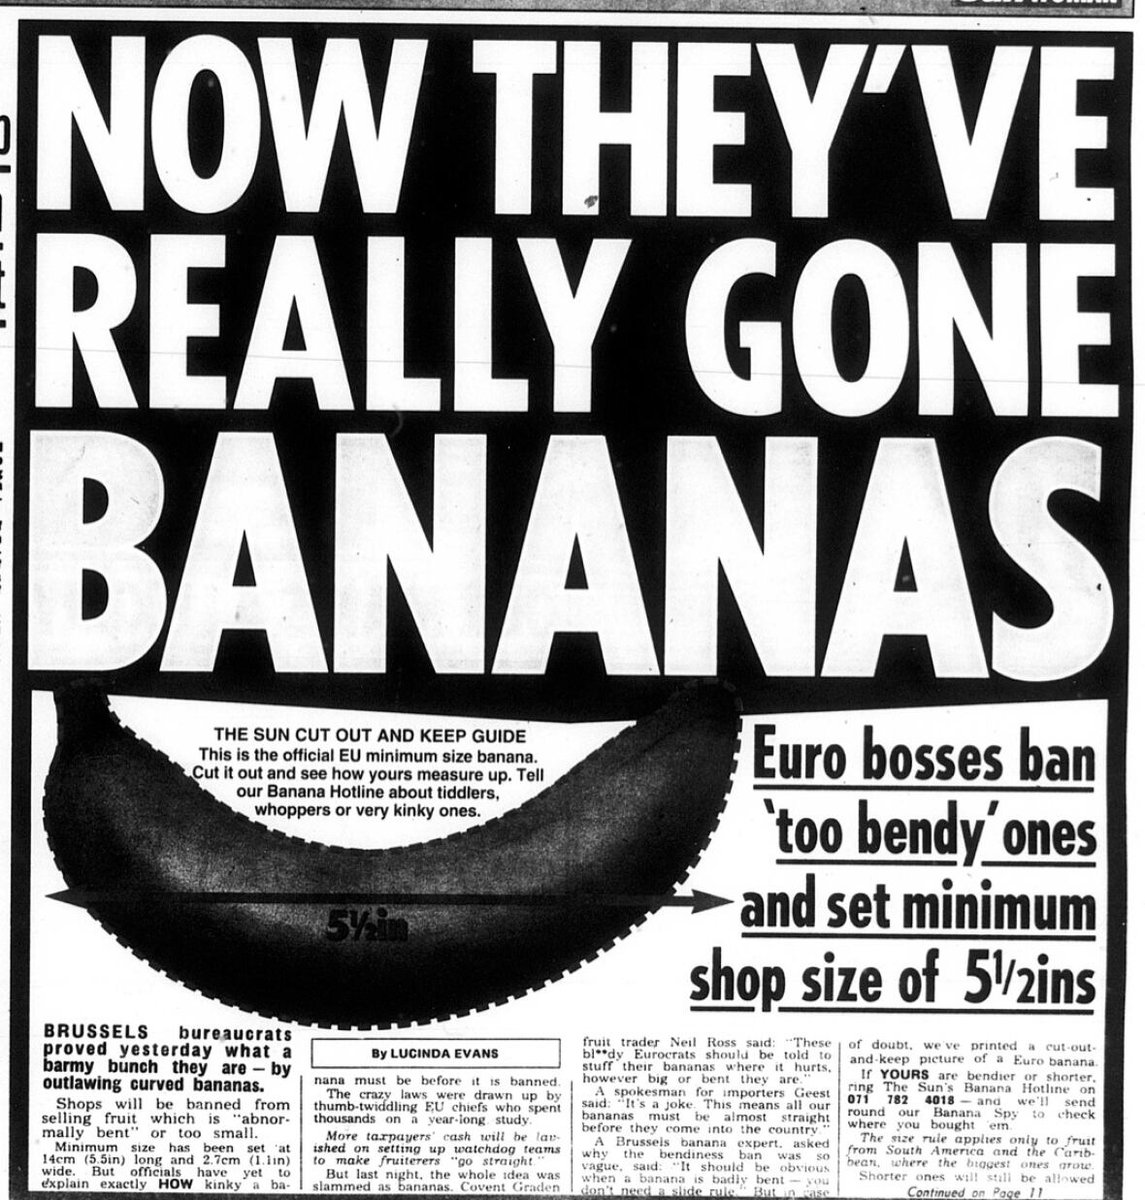 26 years ago, The Sun splashed this headline, which turned into one of the arch-myth of Brexiteers - the idea that 'bonkers bureaucrats' in Brussels banned bendy bananas. [Thread]